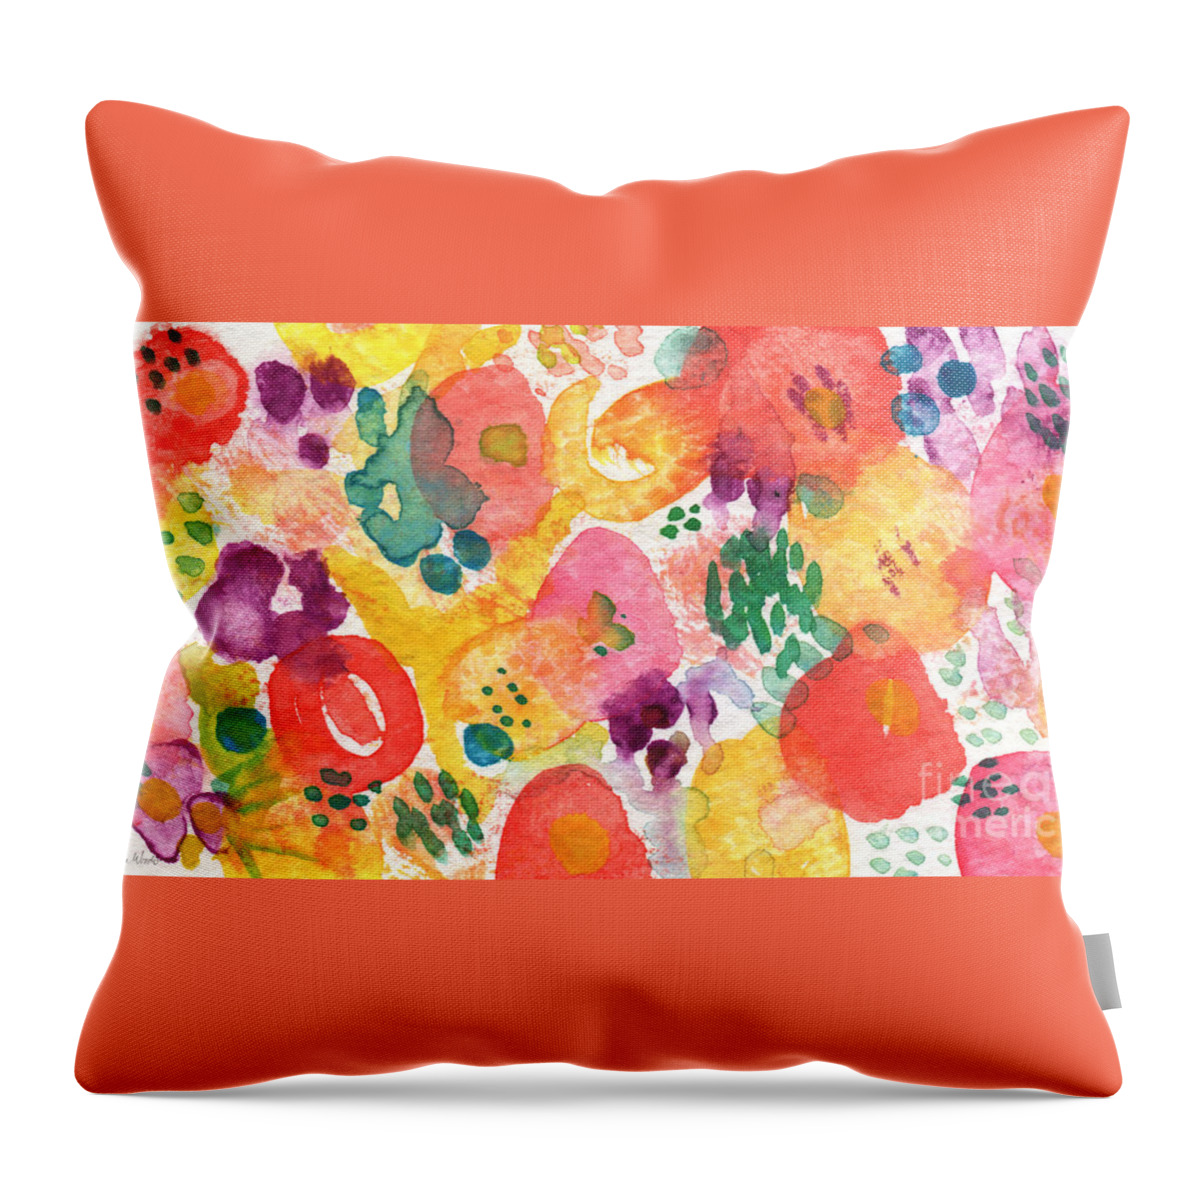 Flowers Throw Pillow featuring the painting Watercolor Garden by Linda Woods